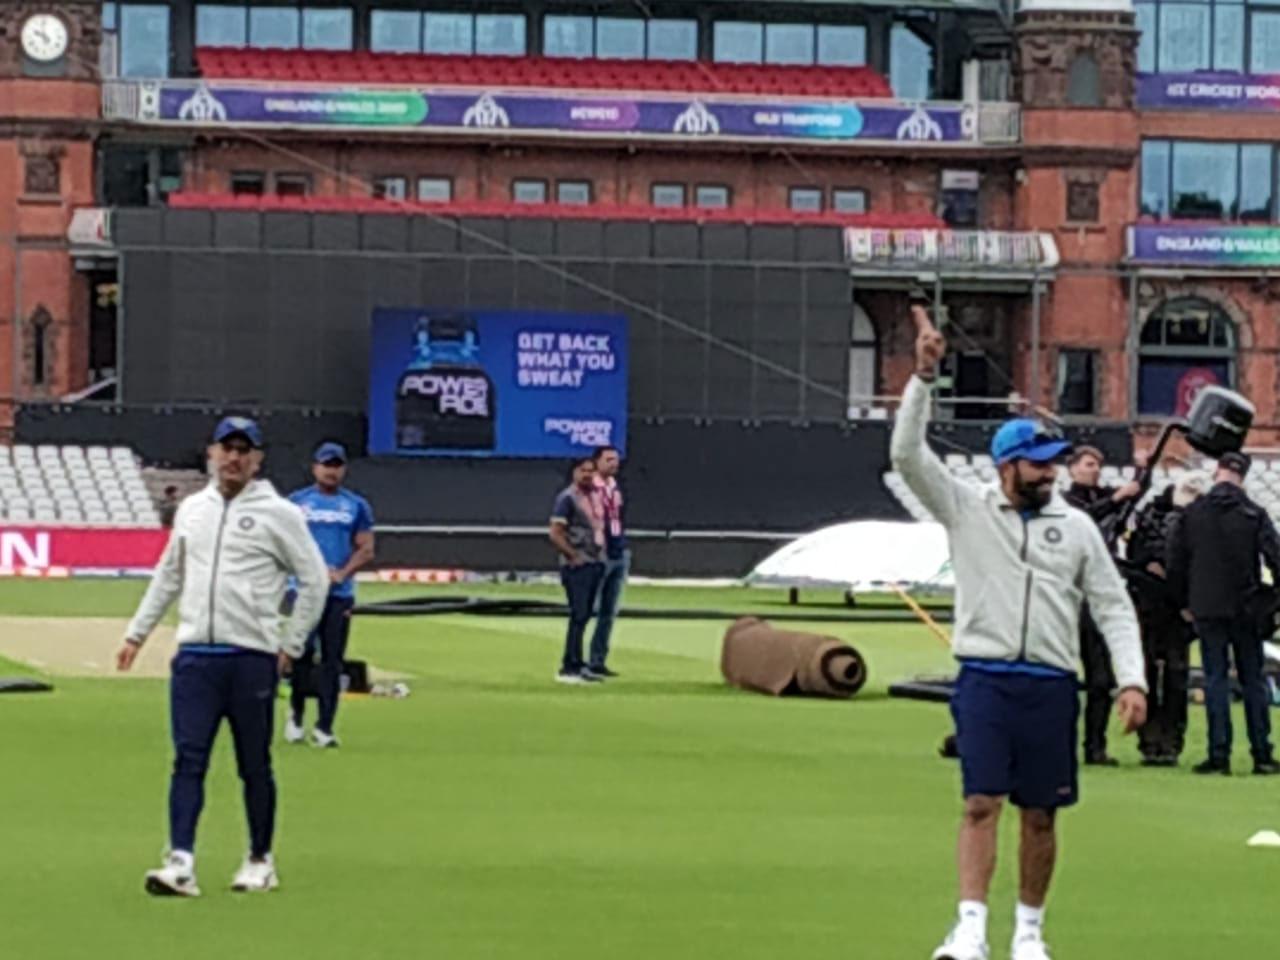 Indian players training hard in Manchester. India will be looking forward to continue their winning record in the ongoing World Cup 2019.